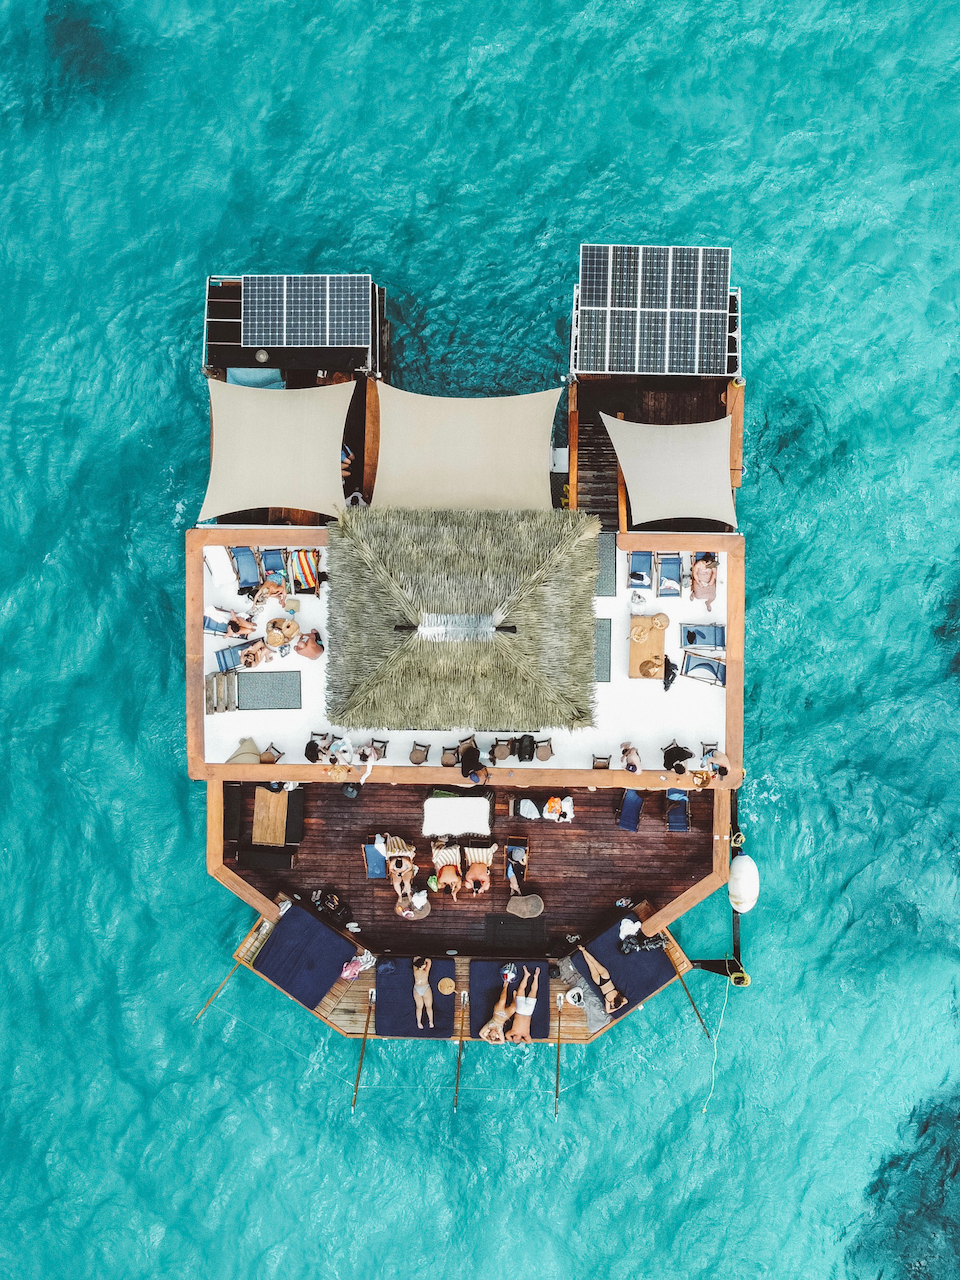 Cloud 9 floating bar seen by drone from above - Mamanuca Islands - Fiji